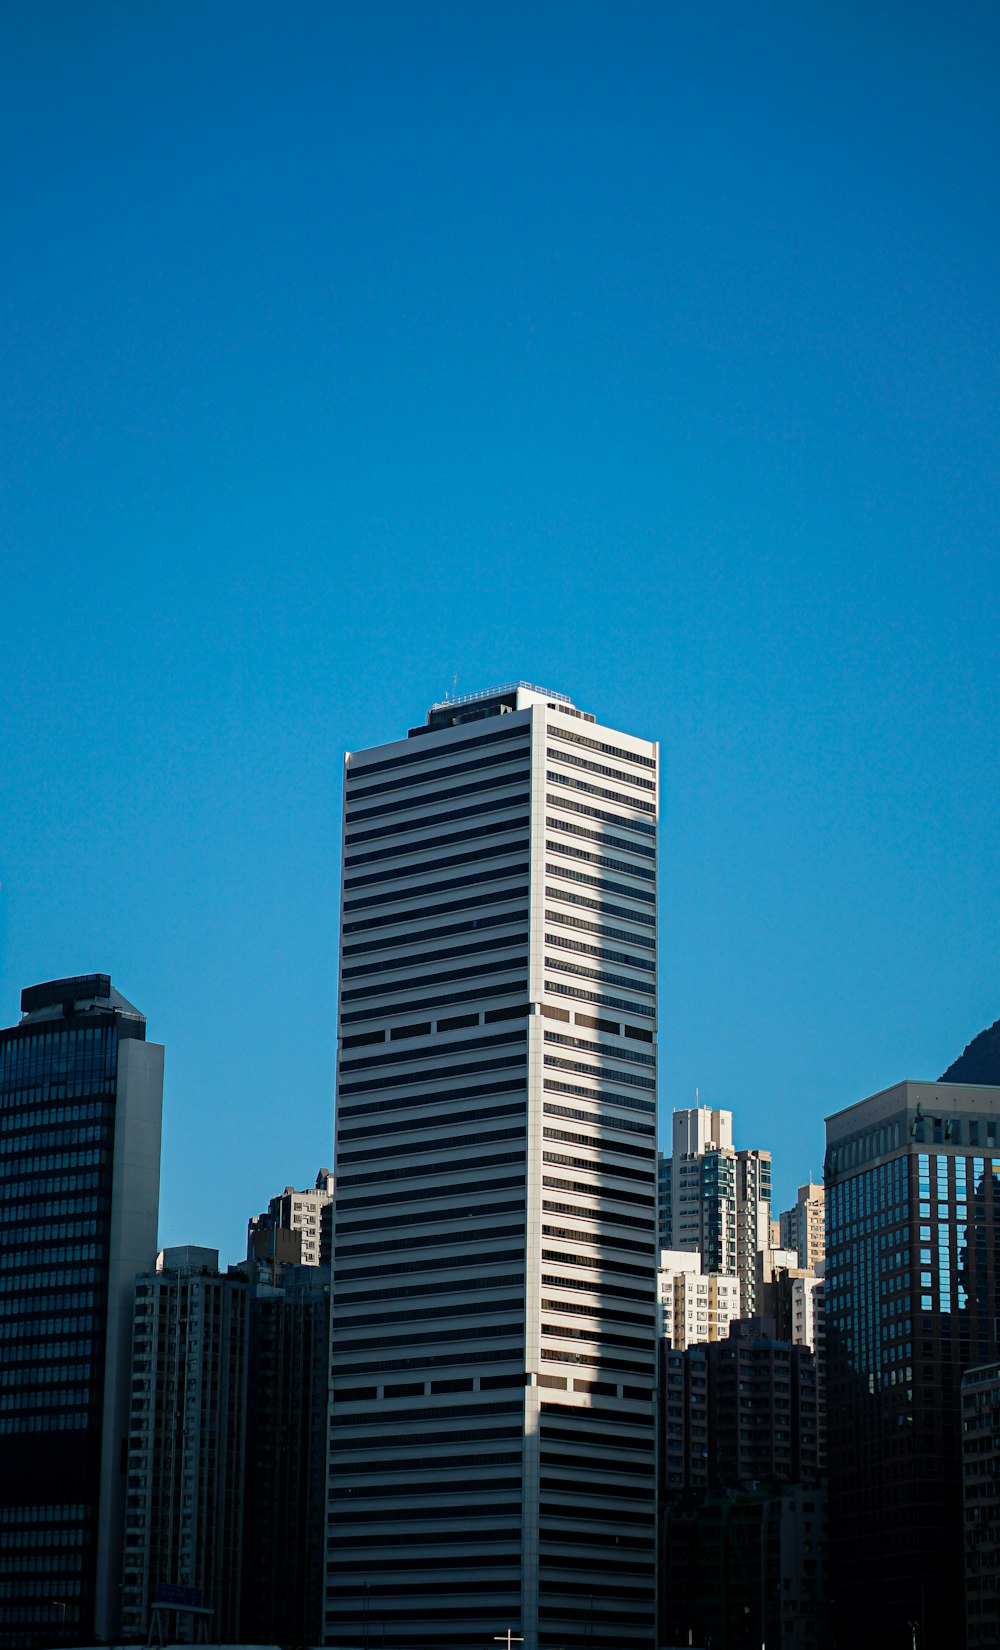 white and brown concrete buildings under blue sky during daytime